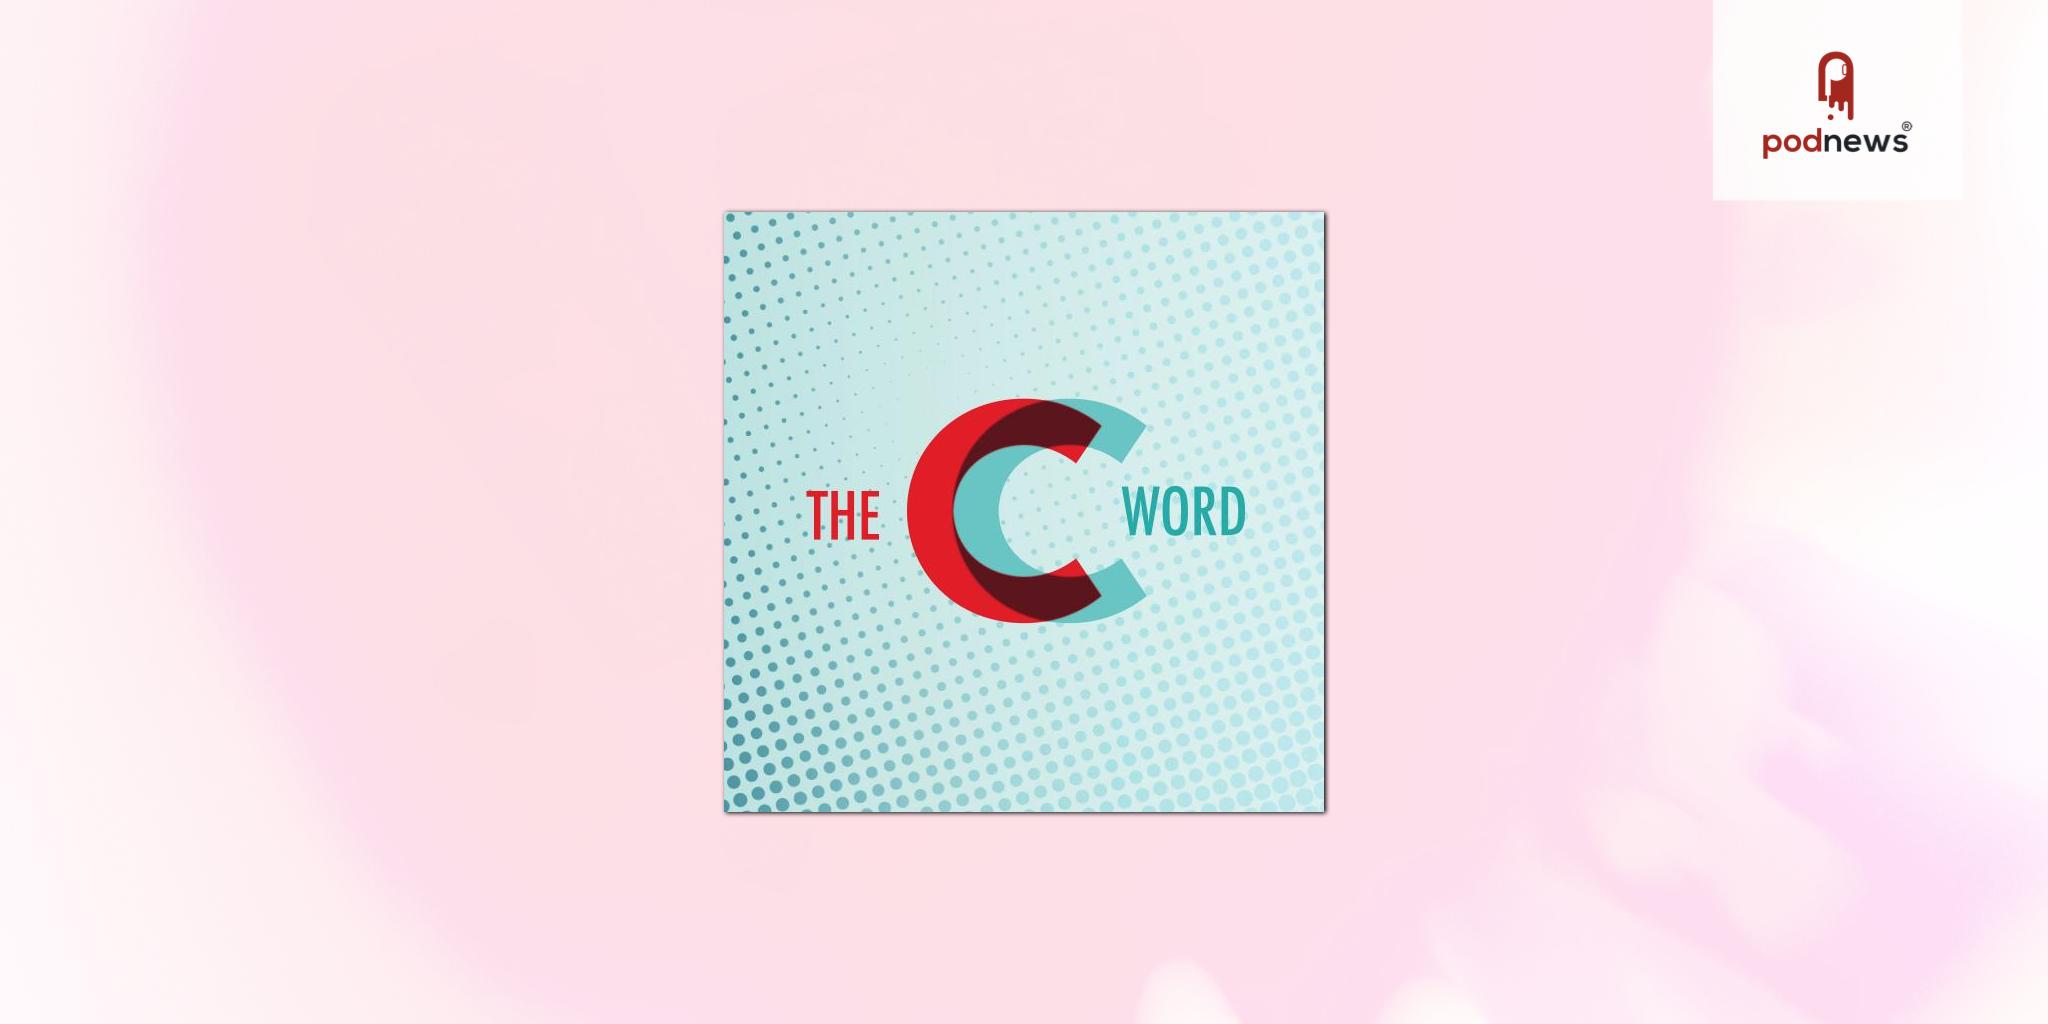 The C Word